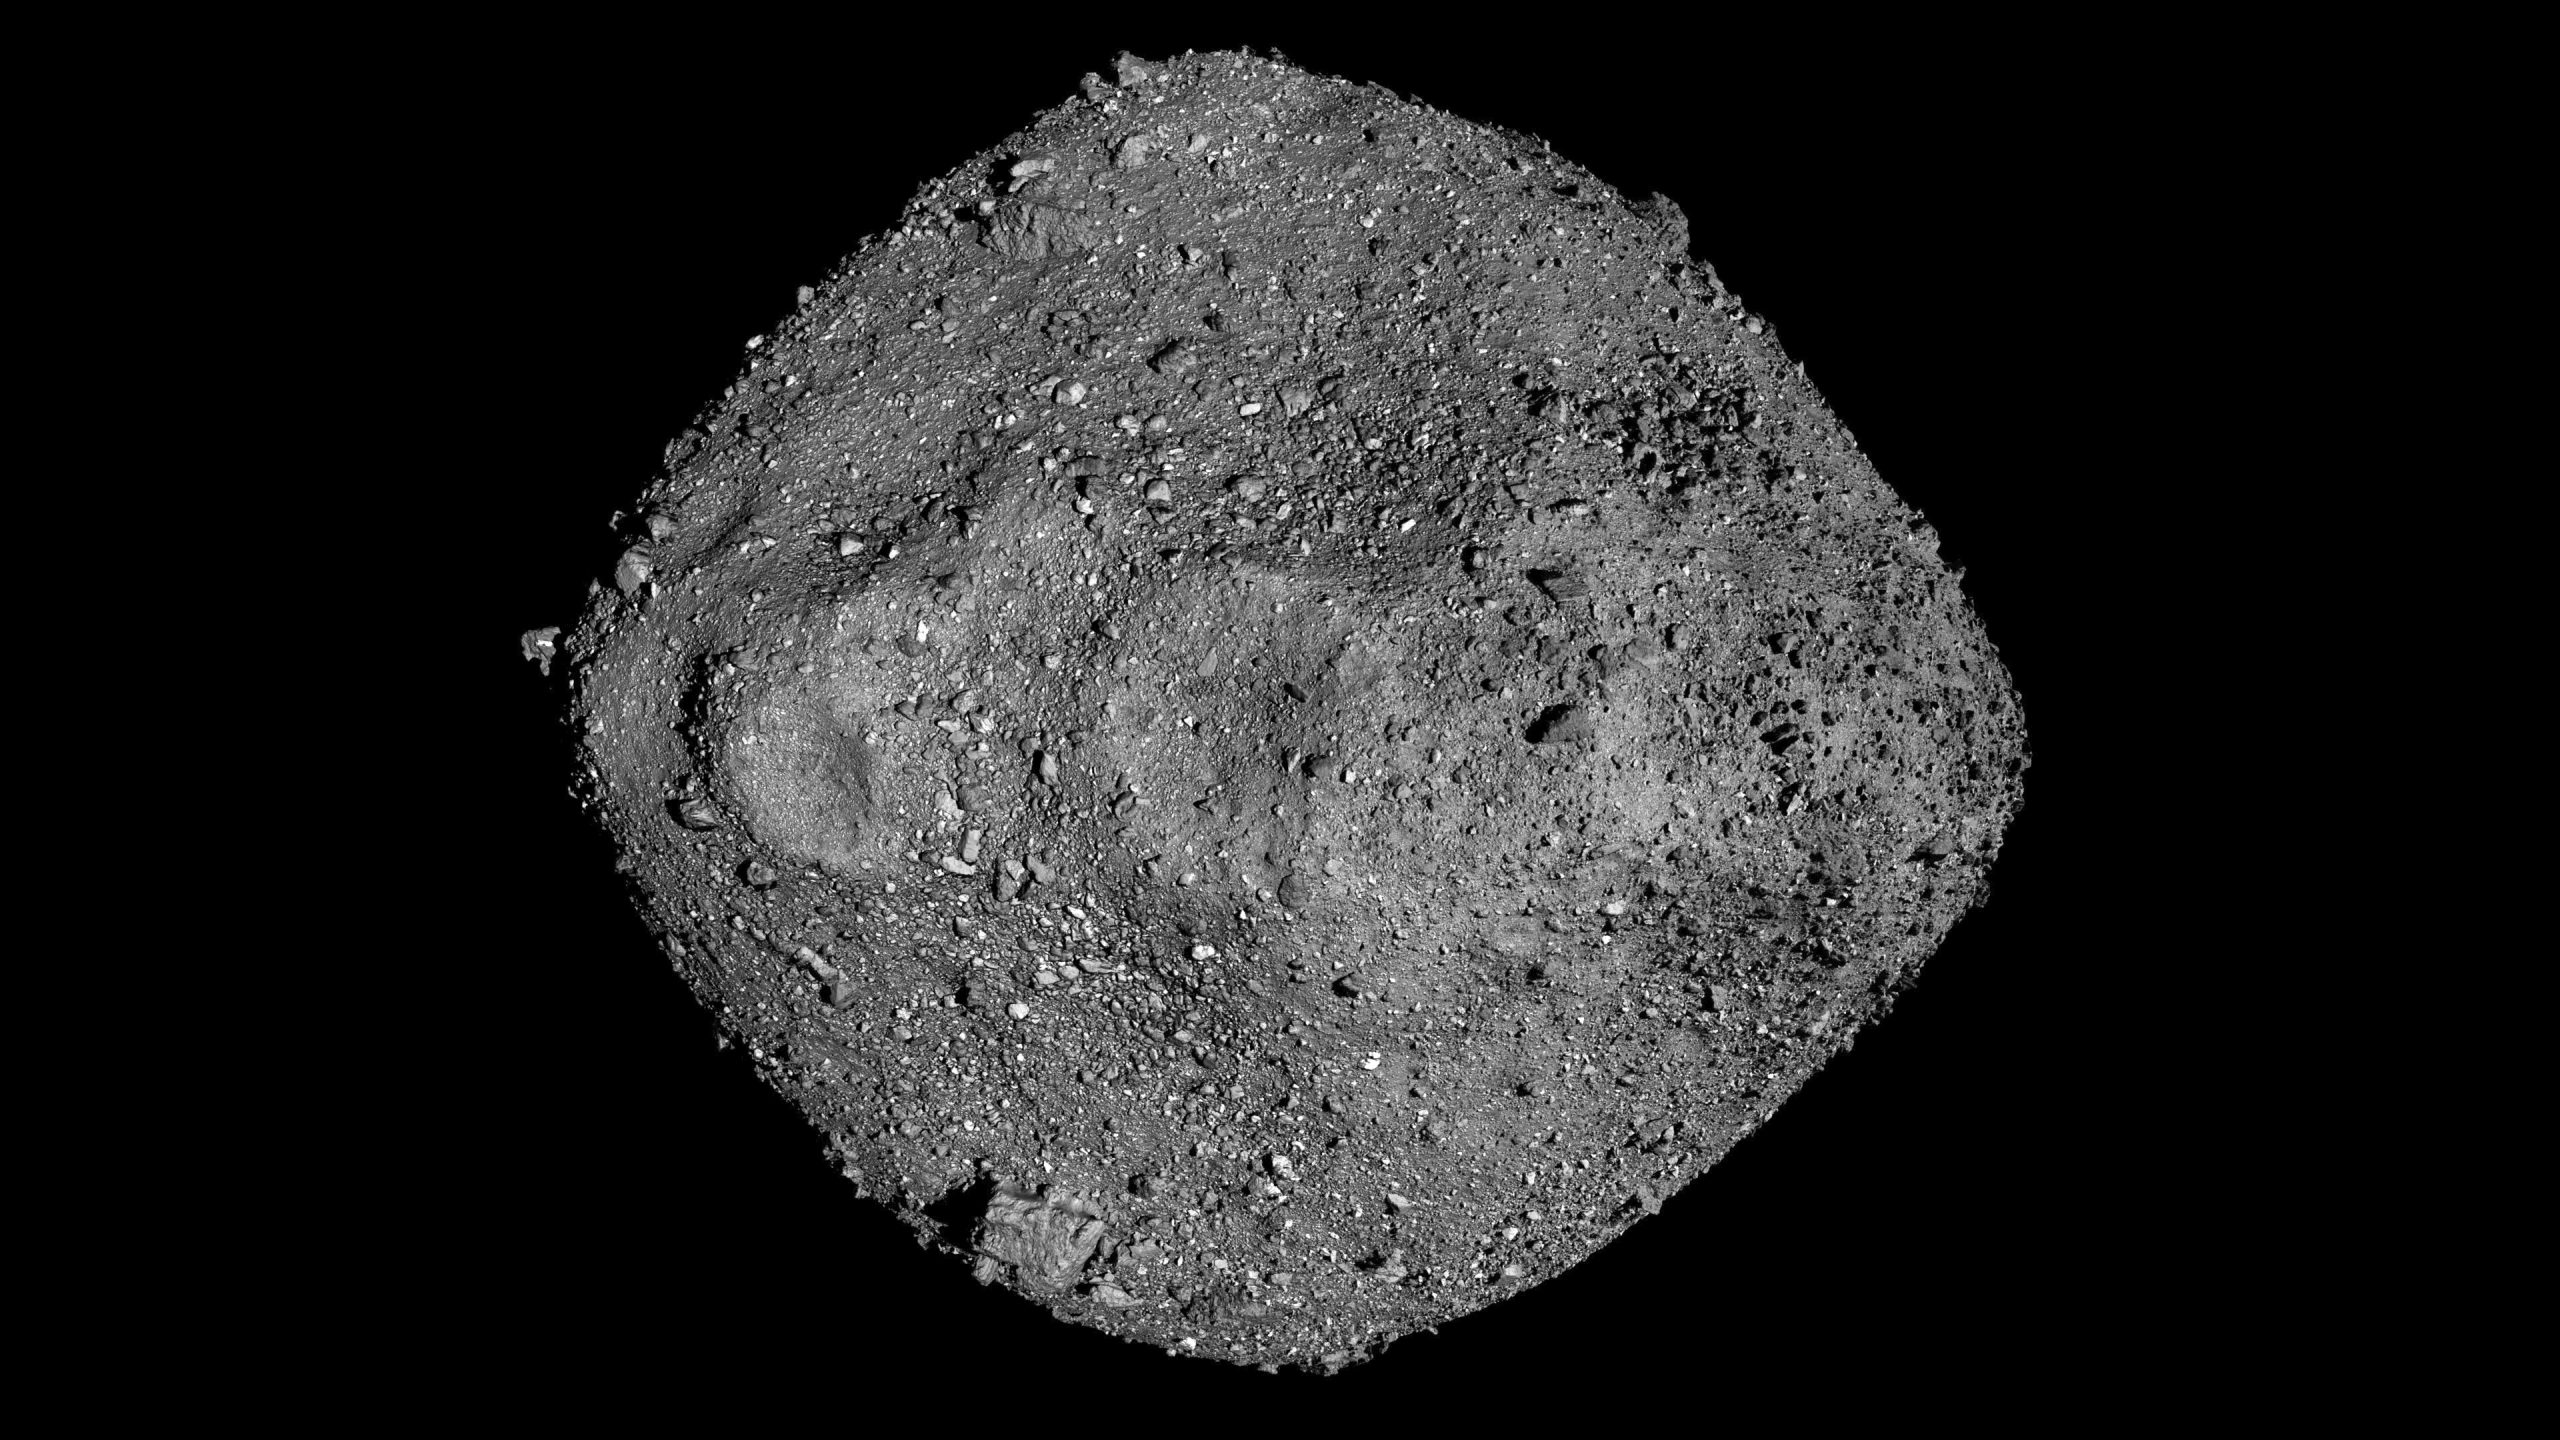 NASA Calculations Show Asteroid Bennu Has a Chance of Slamming Into Earth